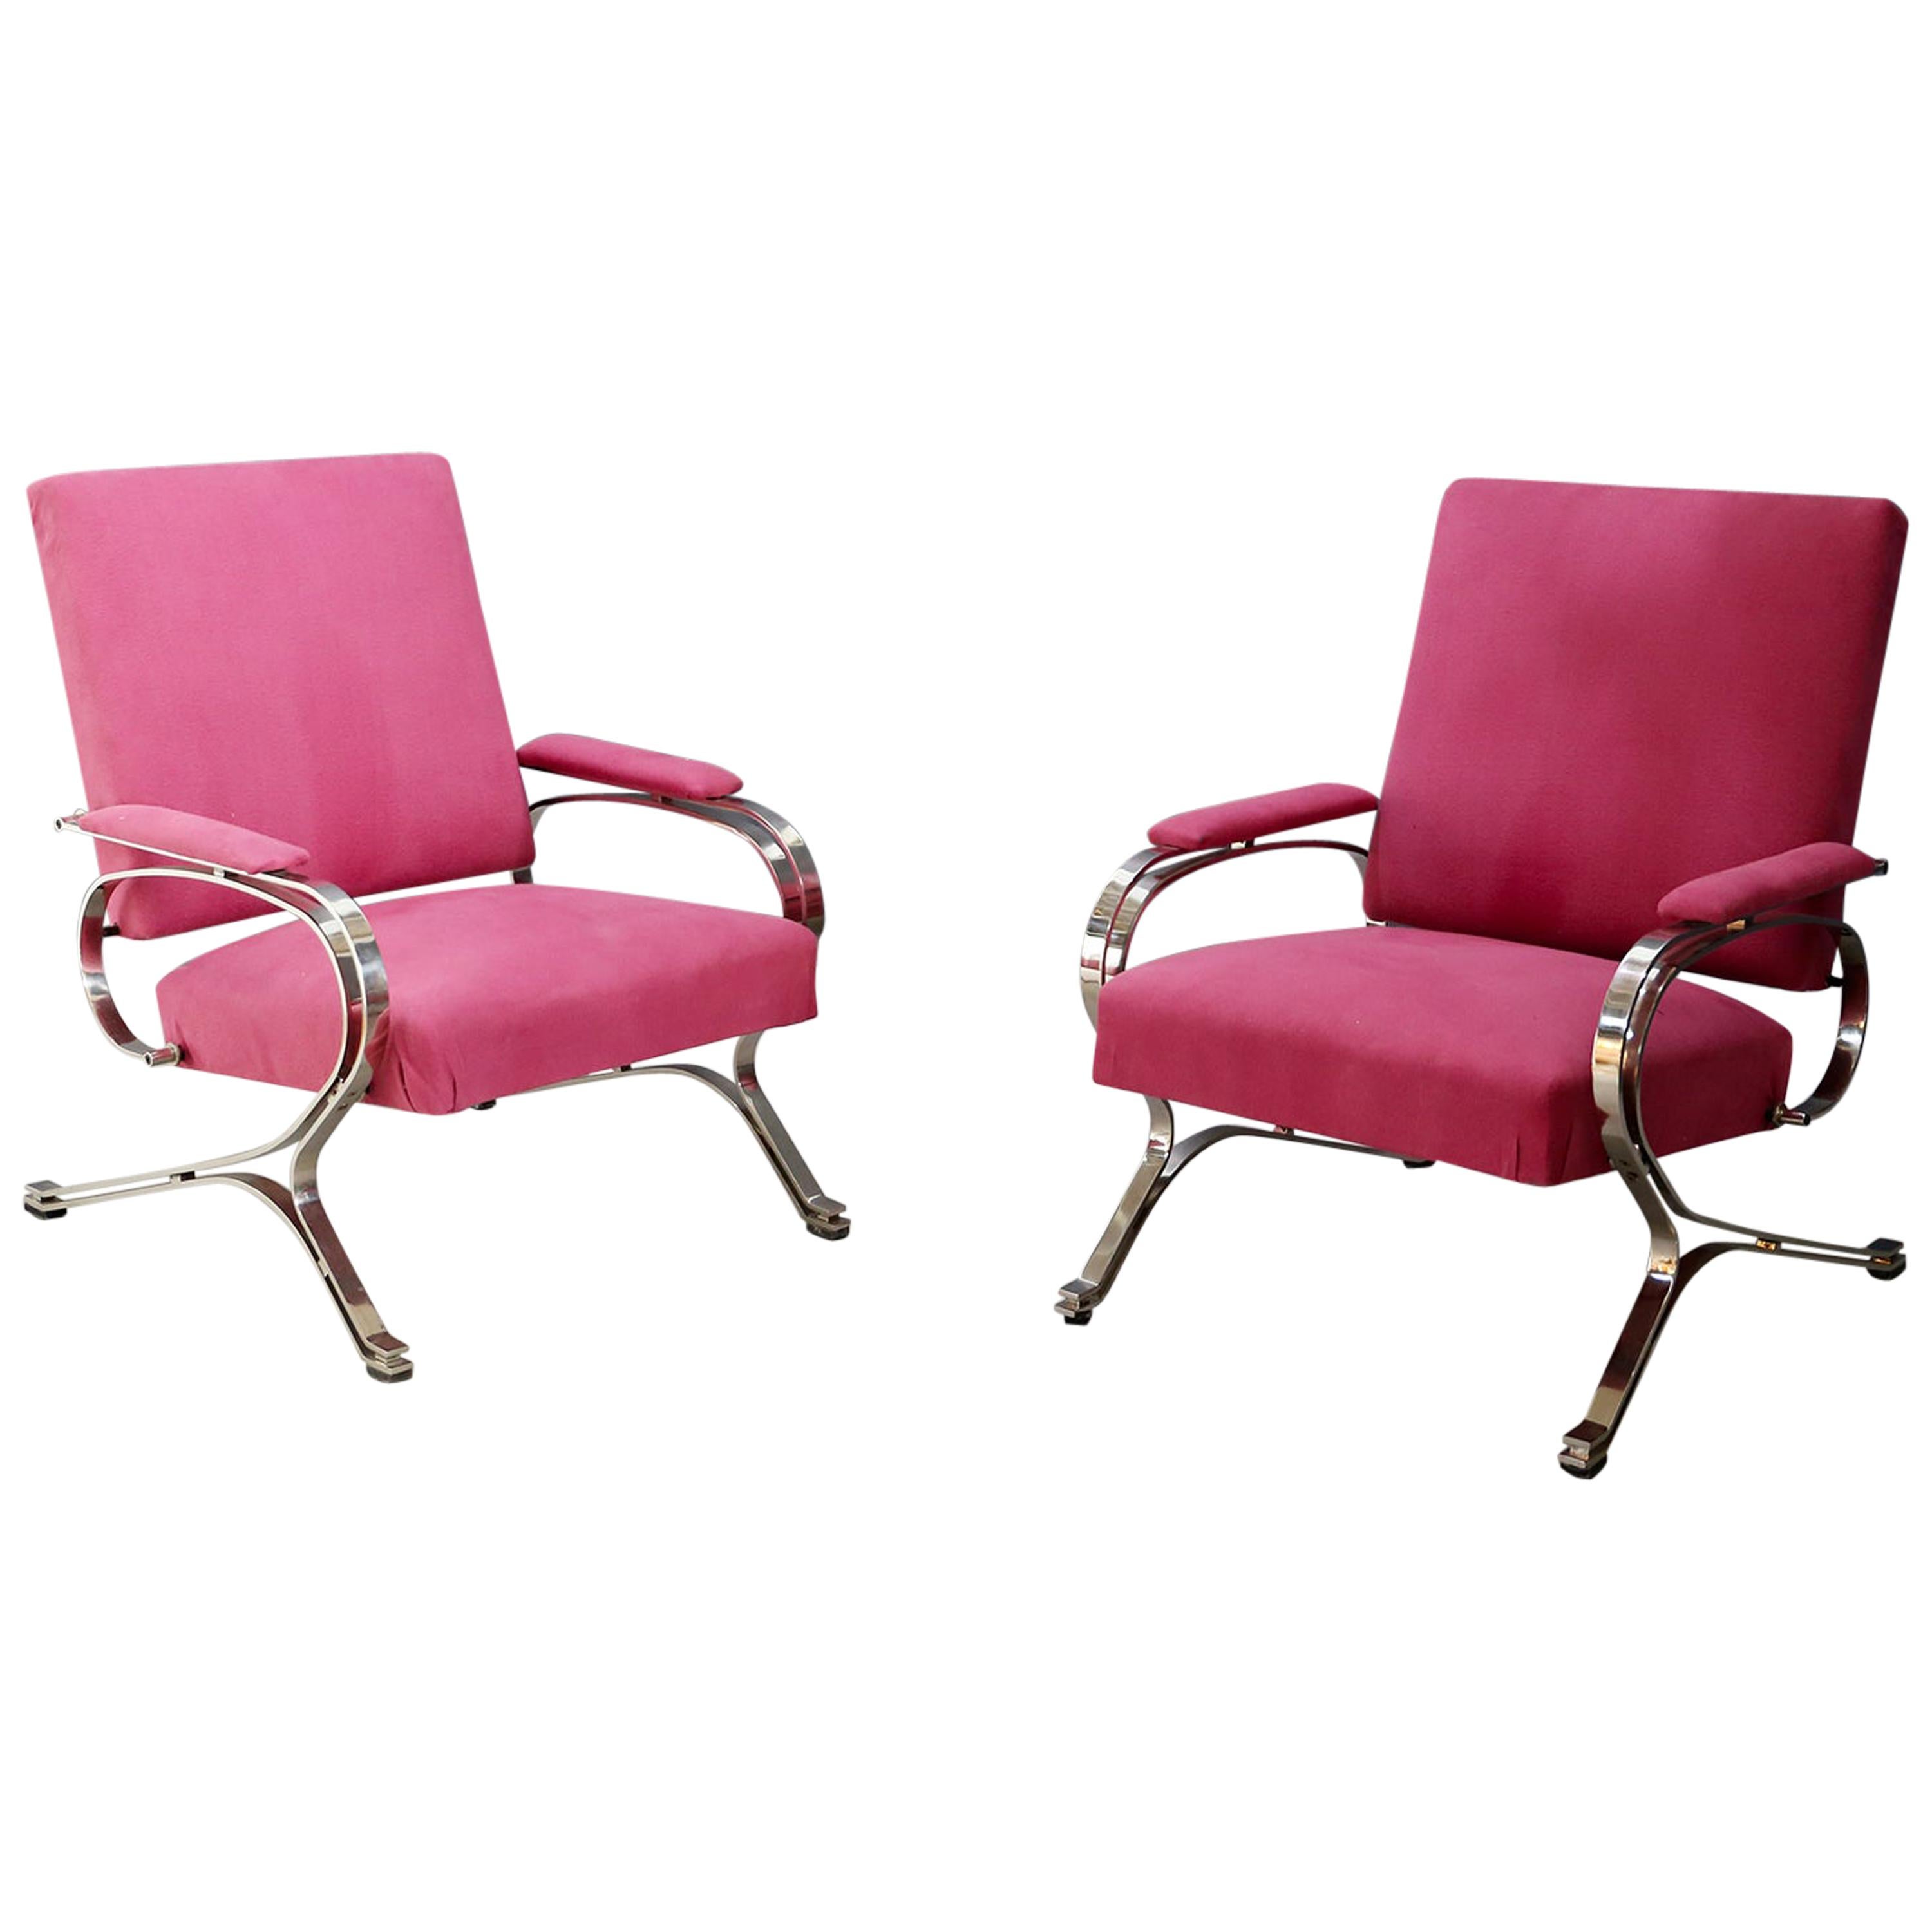 Pair of Midcentury armchair "Micaela" by Gianni Moscatelli for Formanova, 1970s